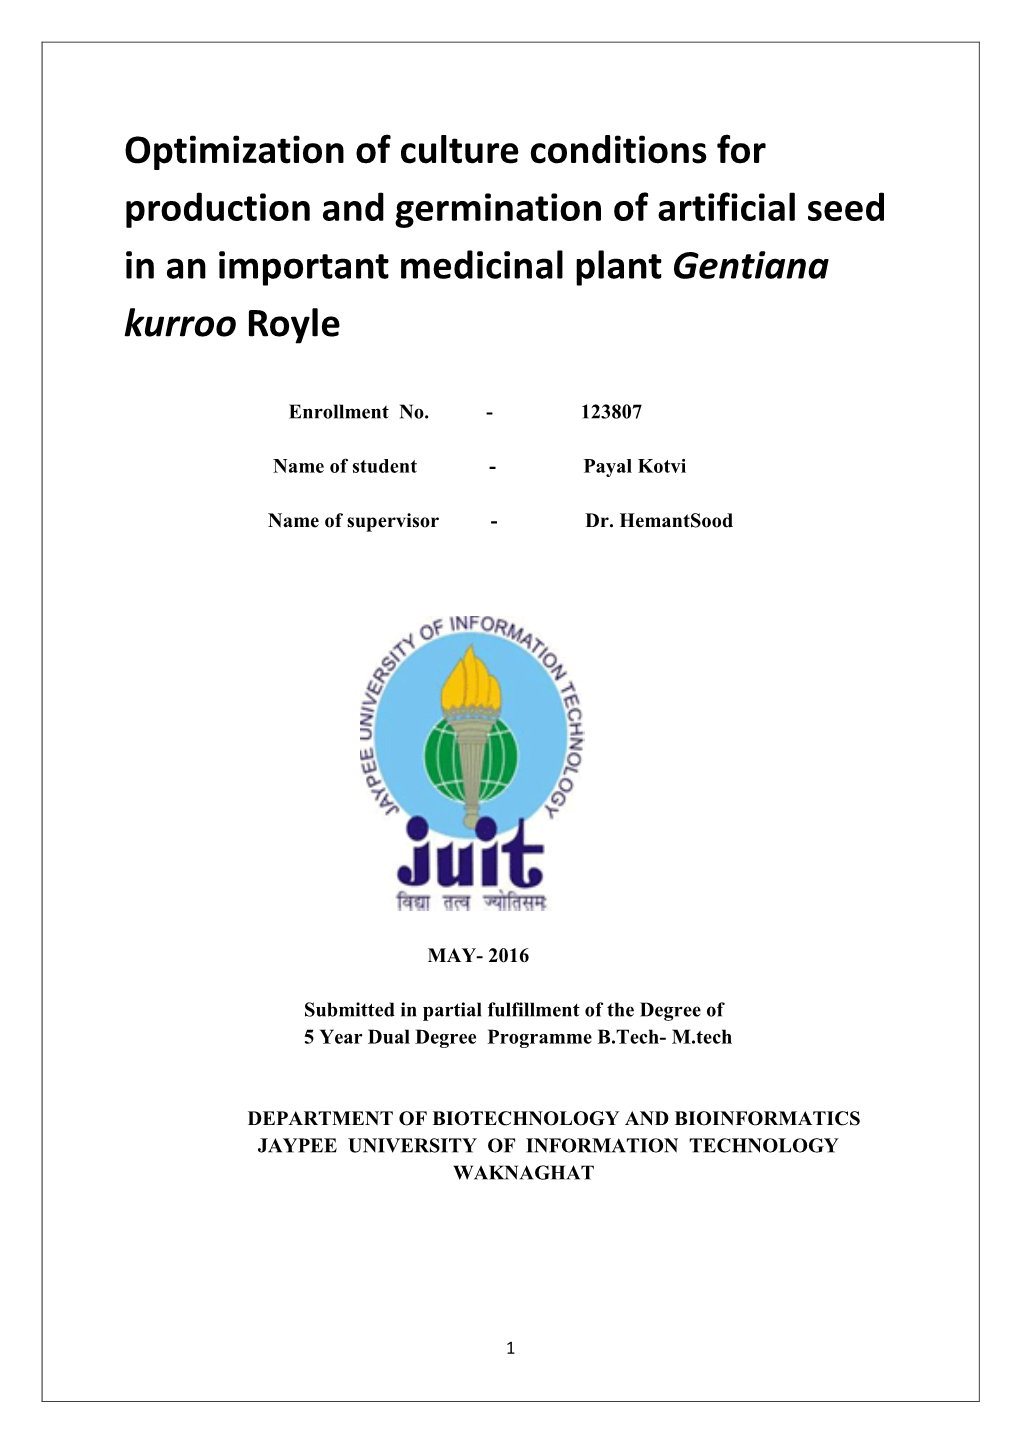 Optimization of Culture Conditions for Production and Germination of Artificial Seed in an Important Medicinal Plant Gentiana Kurroo Royle